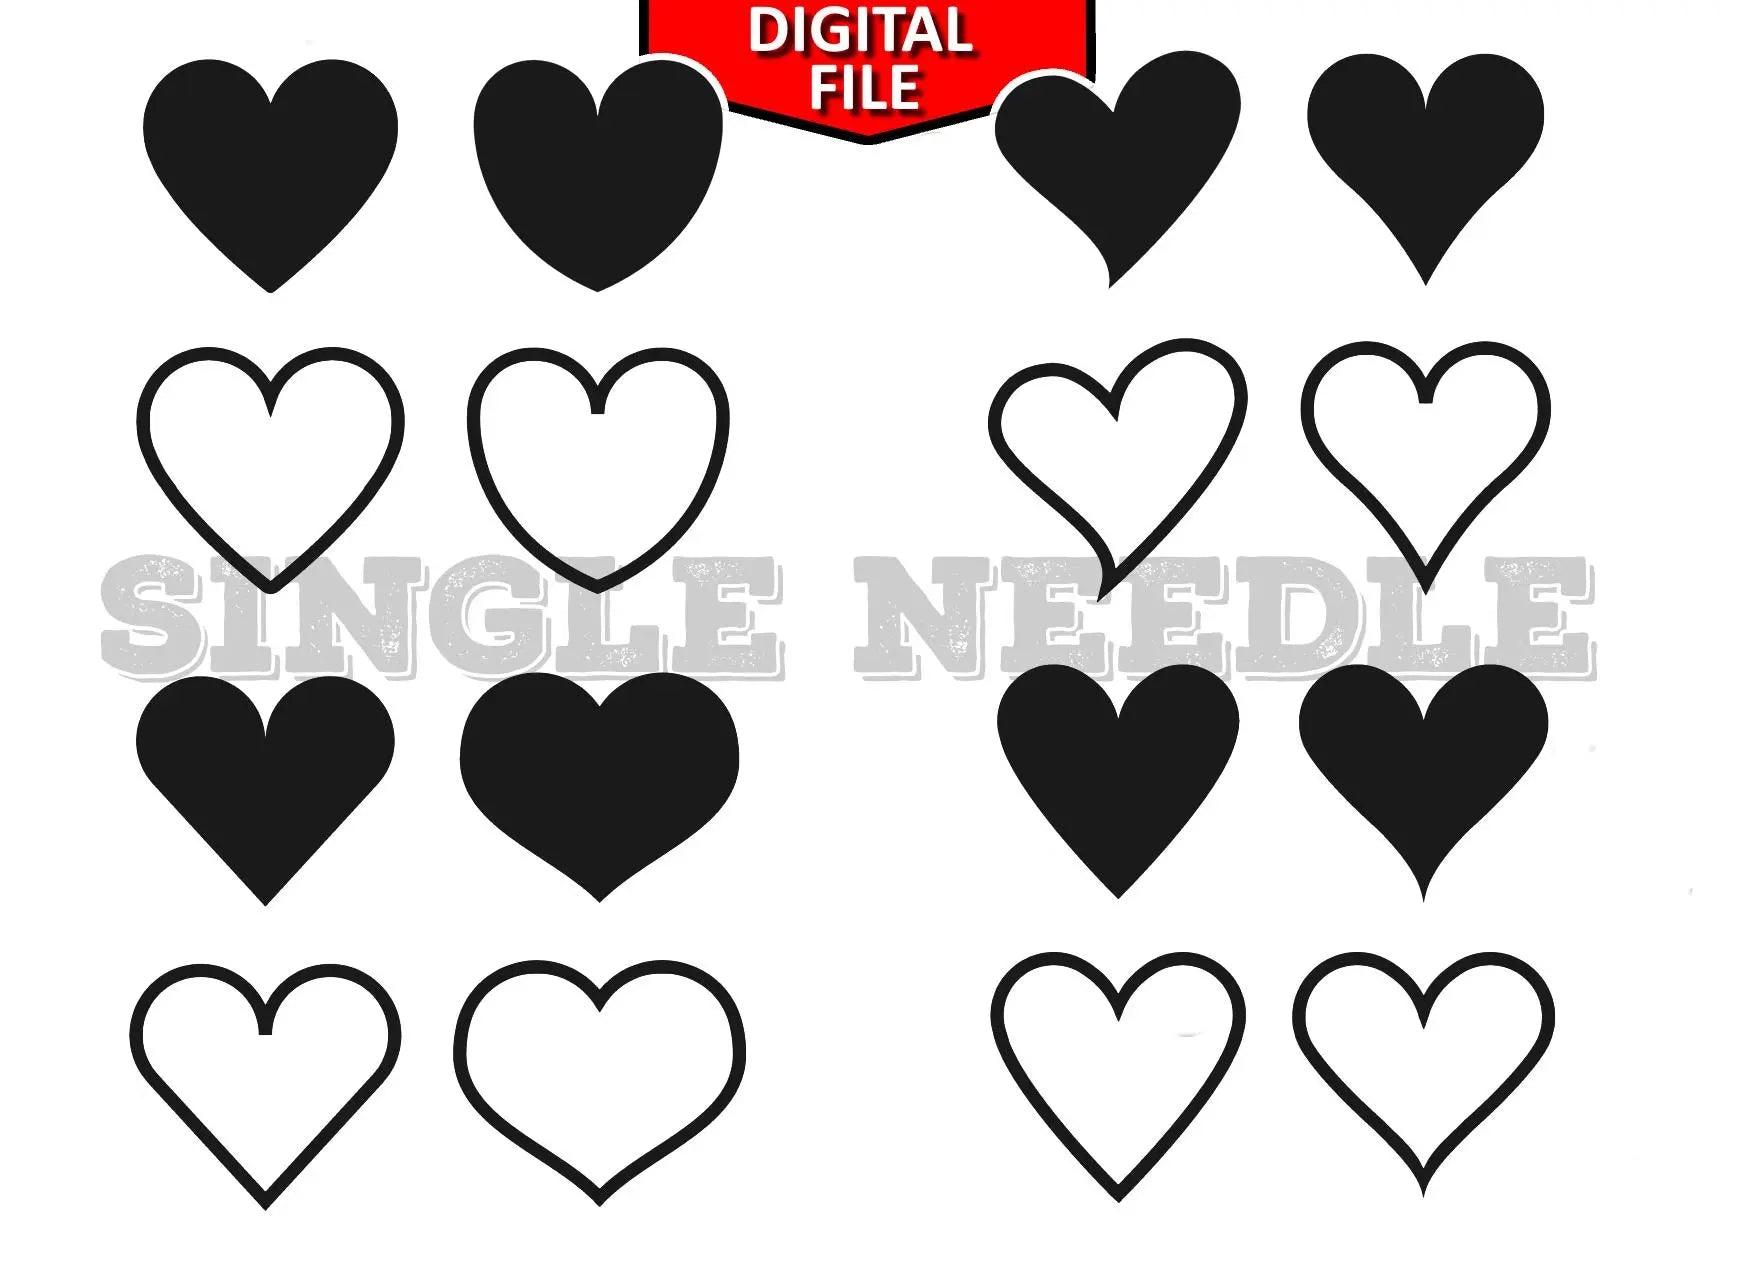 Hearts of Love Tattoo Flash Sheet Stencil for Real Stick and Poke Tattoos - SINGLE NEEDLE